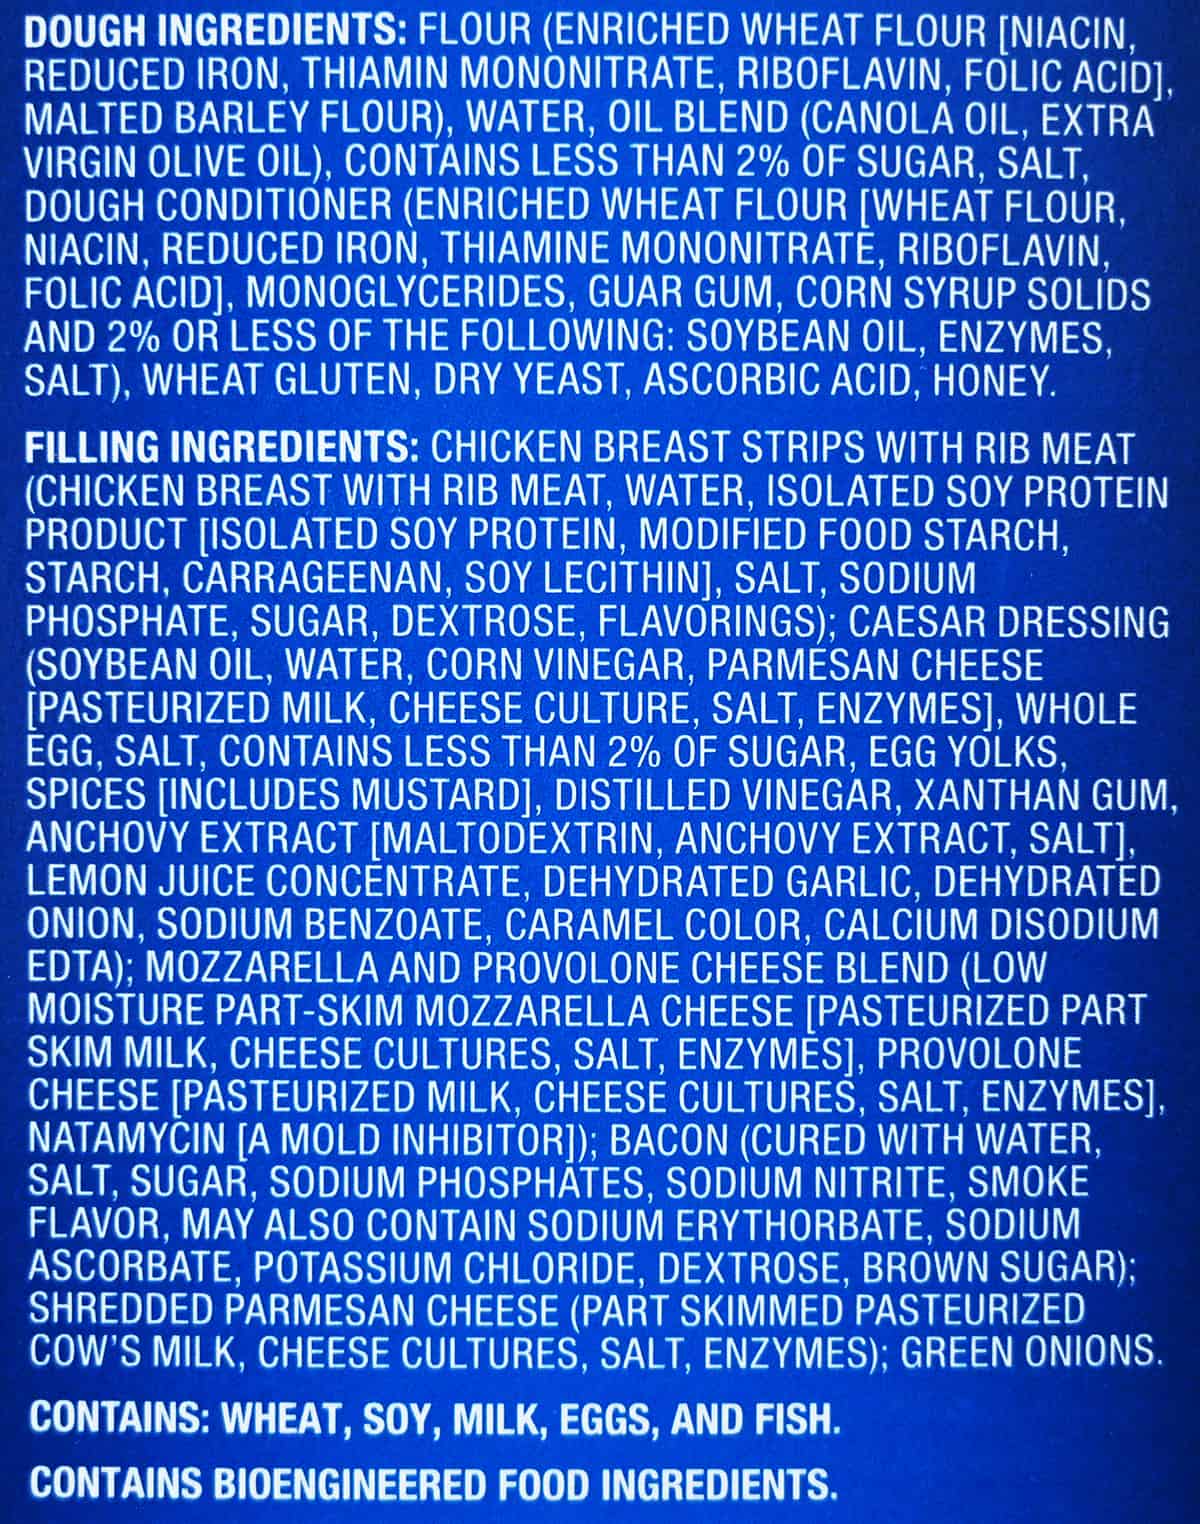 Image of the ingredients list for the chicken bakes from the back of the box.